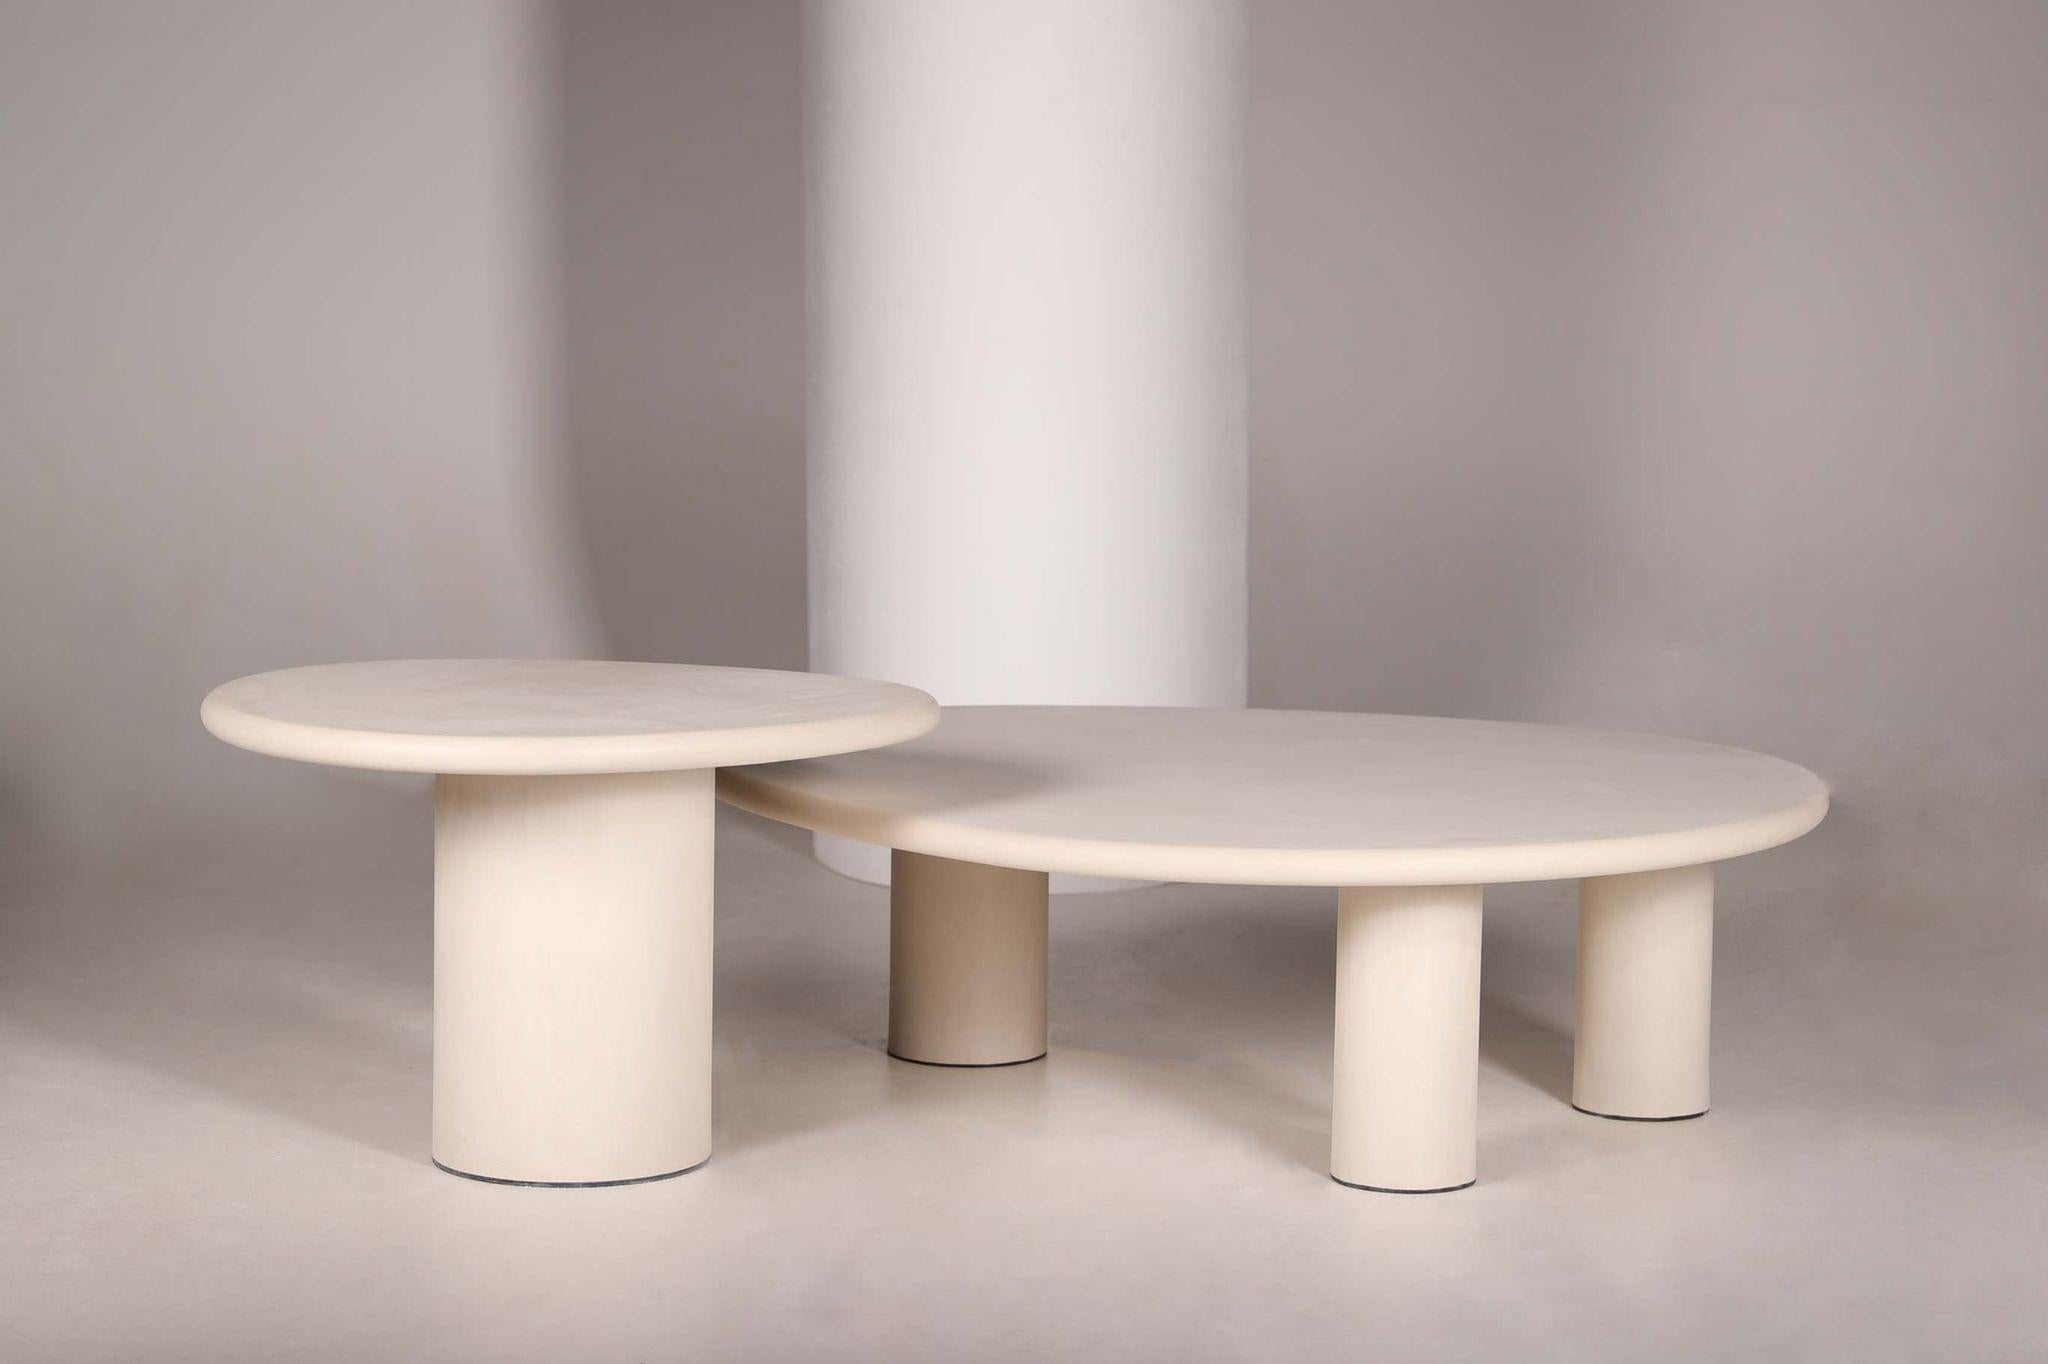 Handmade outdoor rock-shaped natural plaster table set by Philippe Colette.
Dimensions: 
80 x 60 x 50, foot Ø 30 cm
130 x 100 x 38, foot Ø 20 cm 
Materials: mineral lime plaster.

Our tables are in mineral lime plaster, unlike mortex, they are very